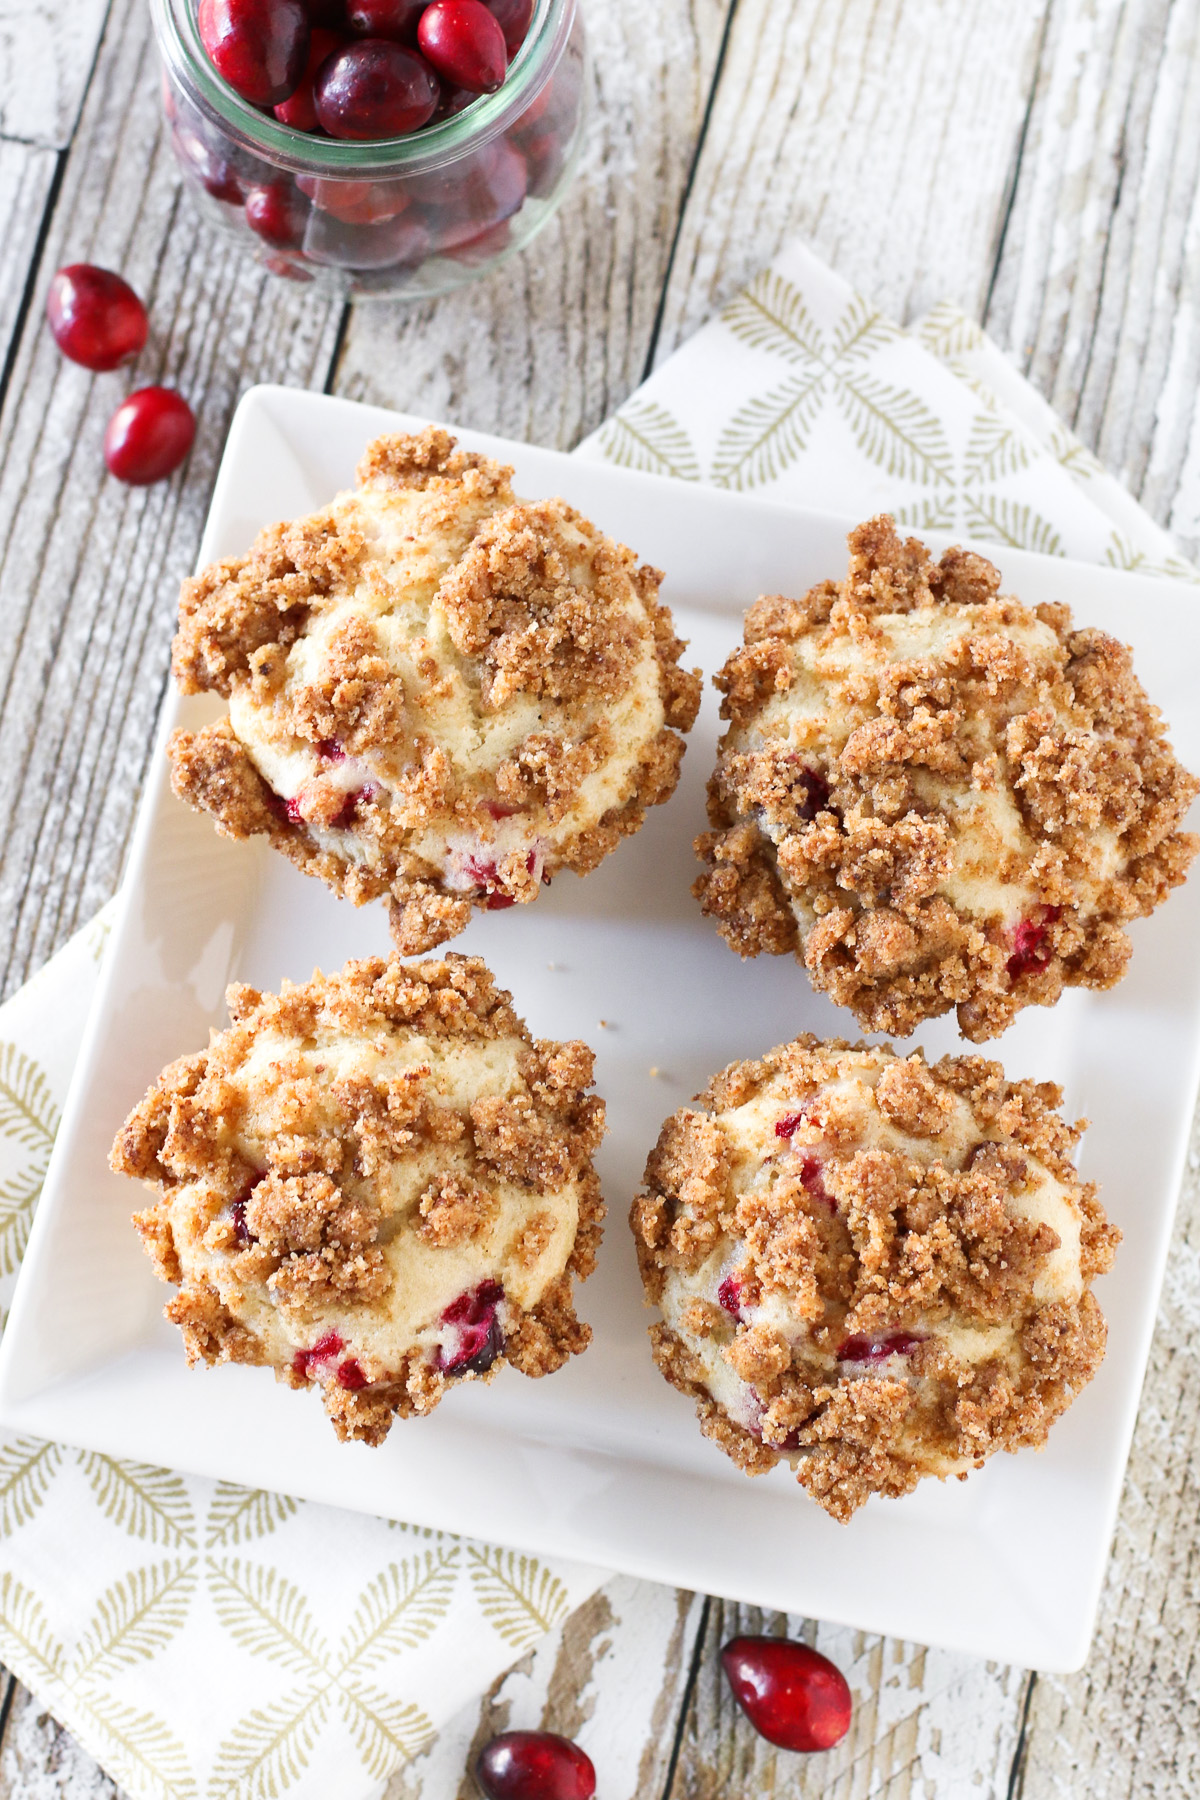 Gluten Free Vegan Cranberry Coffeecake Muffins. Fluffy vanilla cake, studded with fresh cranberries and topped with a crunchy cinnamon topping.